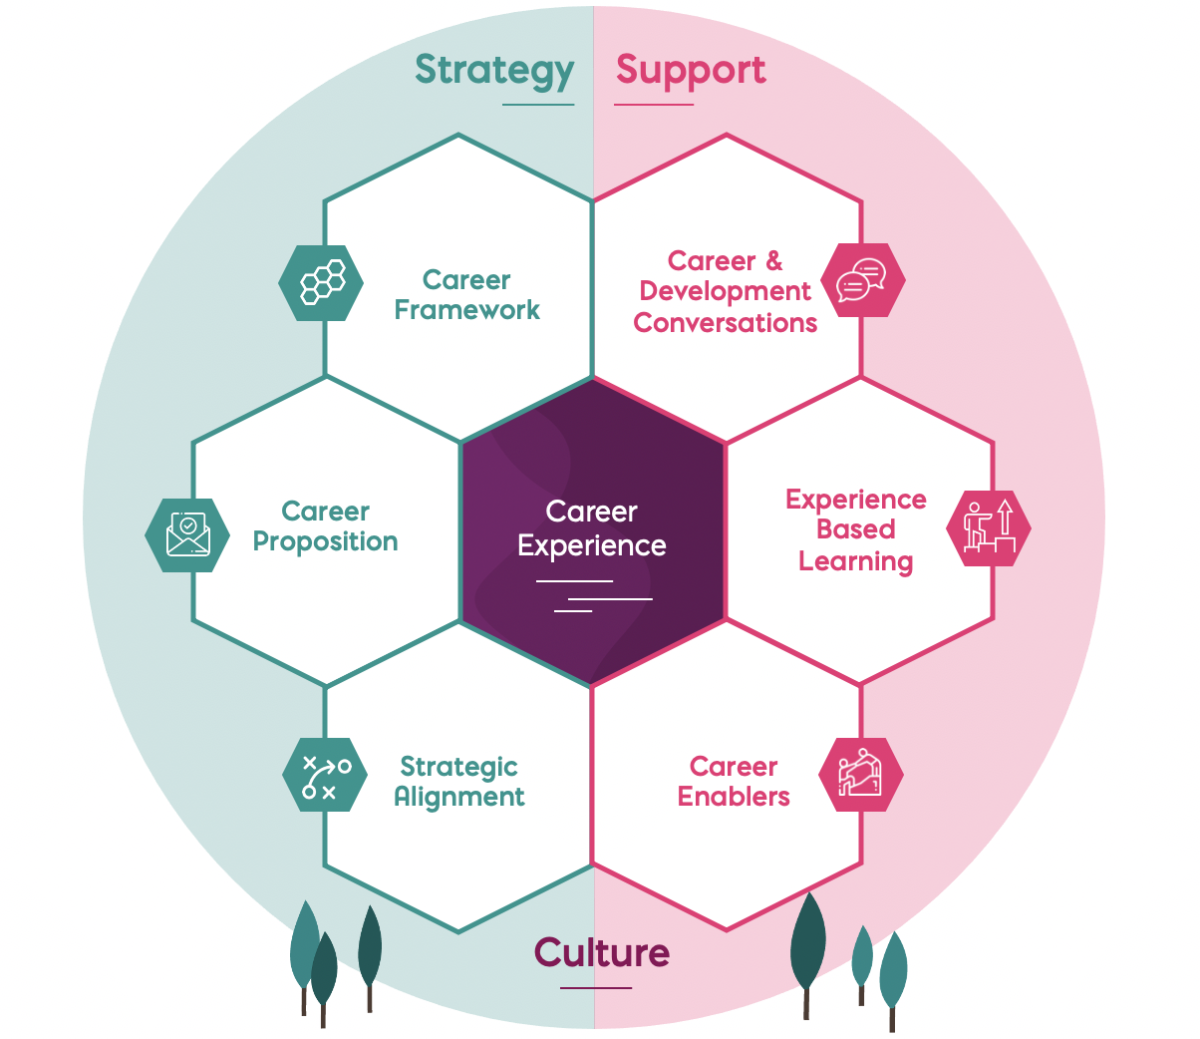 Diagram of tessellated hexagons showing strategy and support around career experience